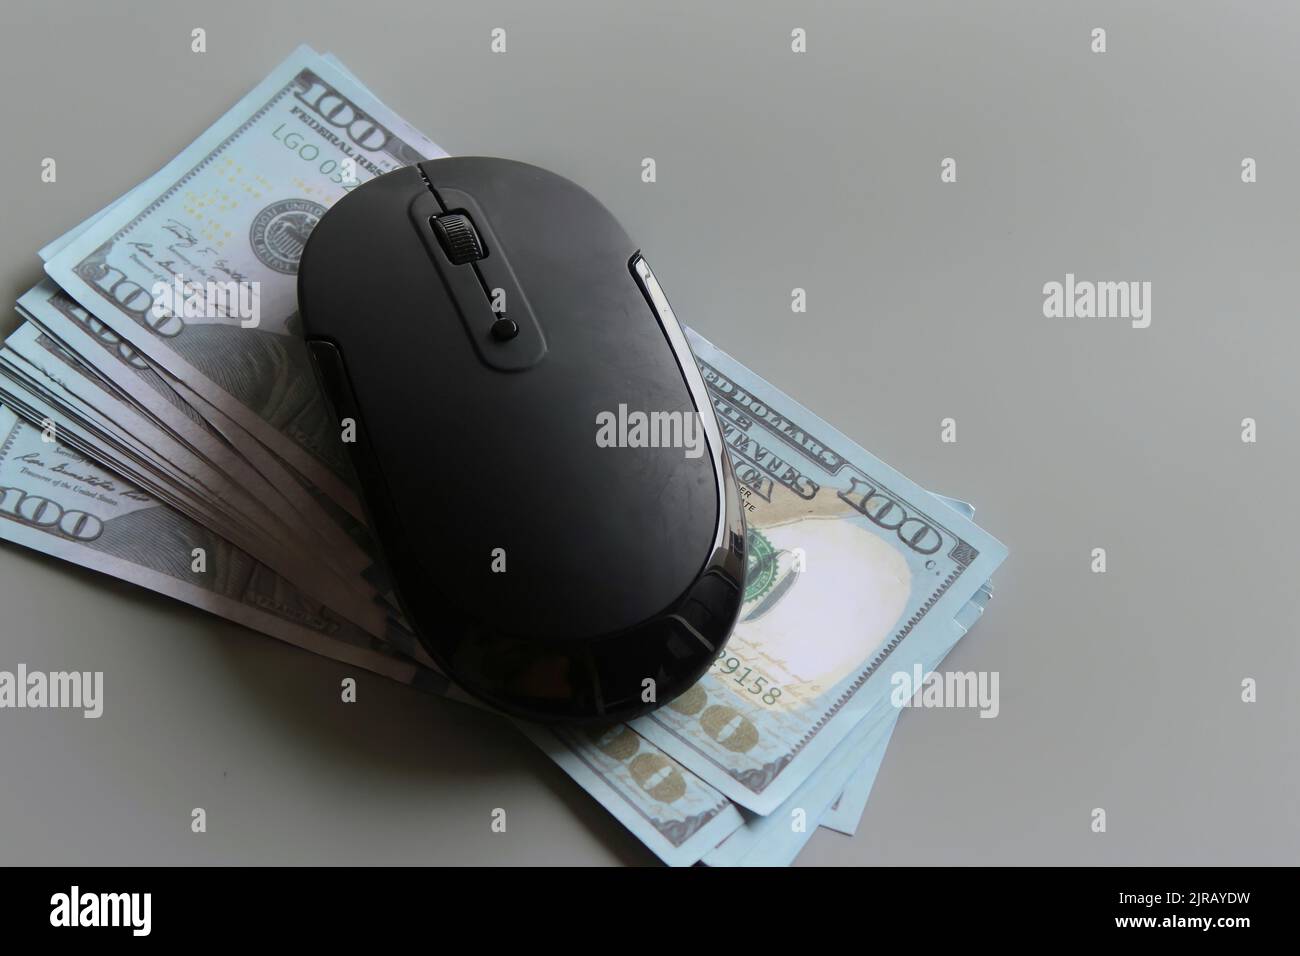 US dollar and computer mouse. Pay per click, online banking, shopping and business concept Stock Photo